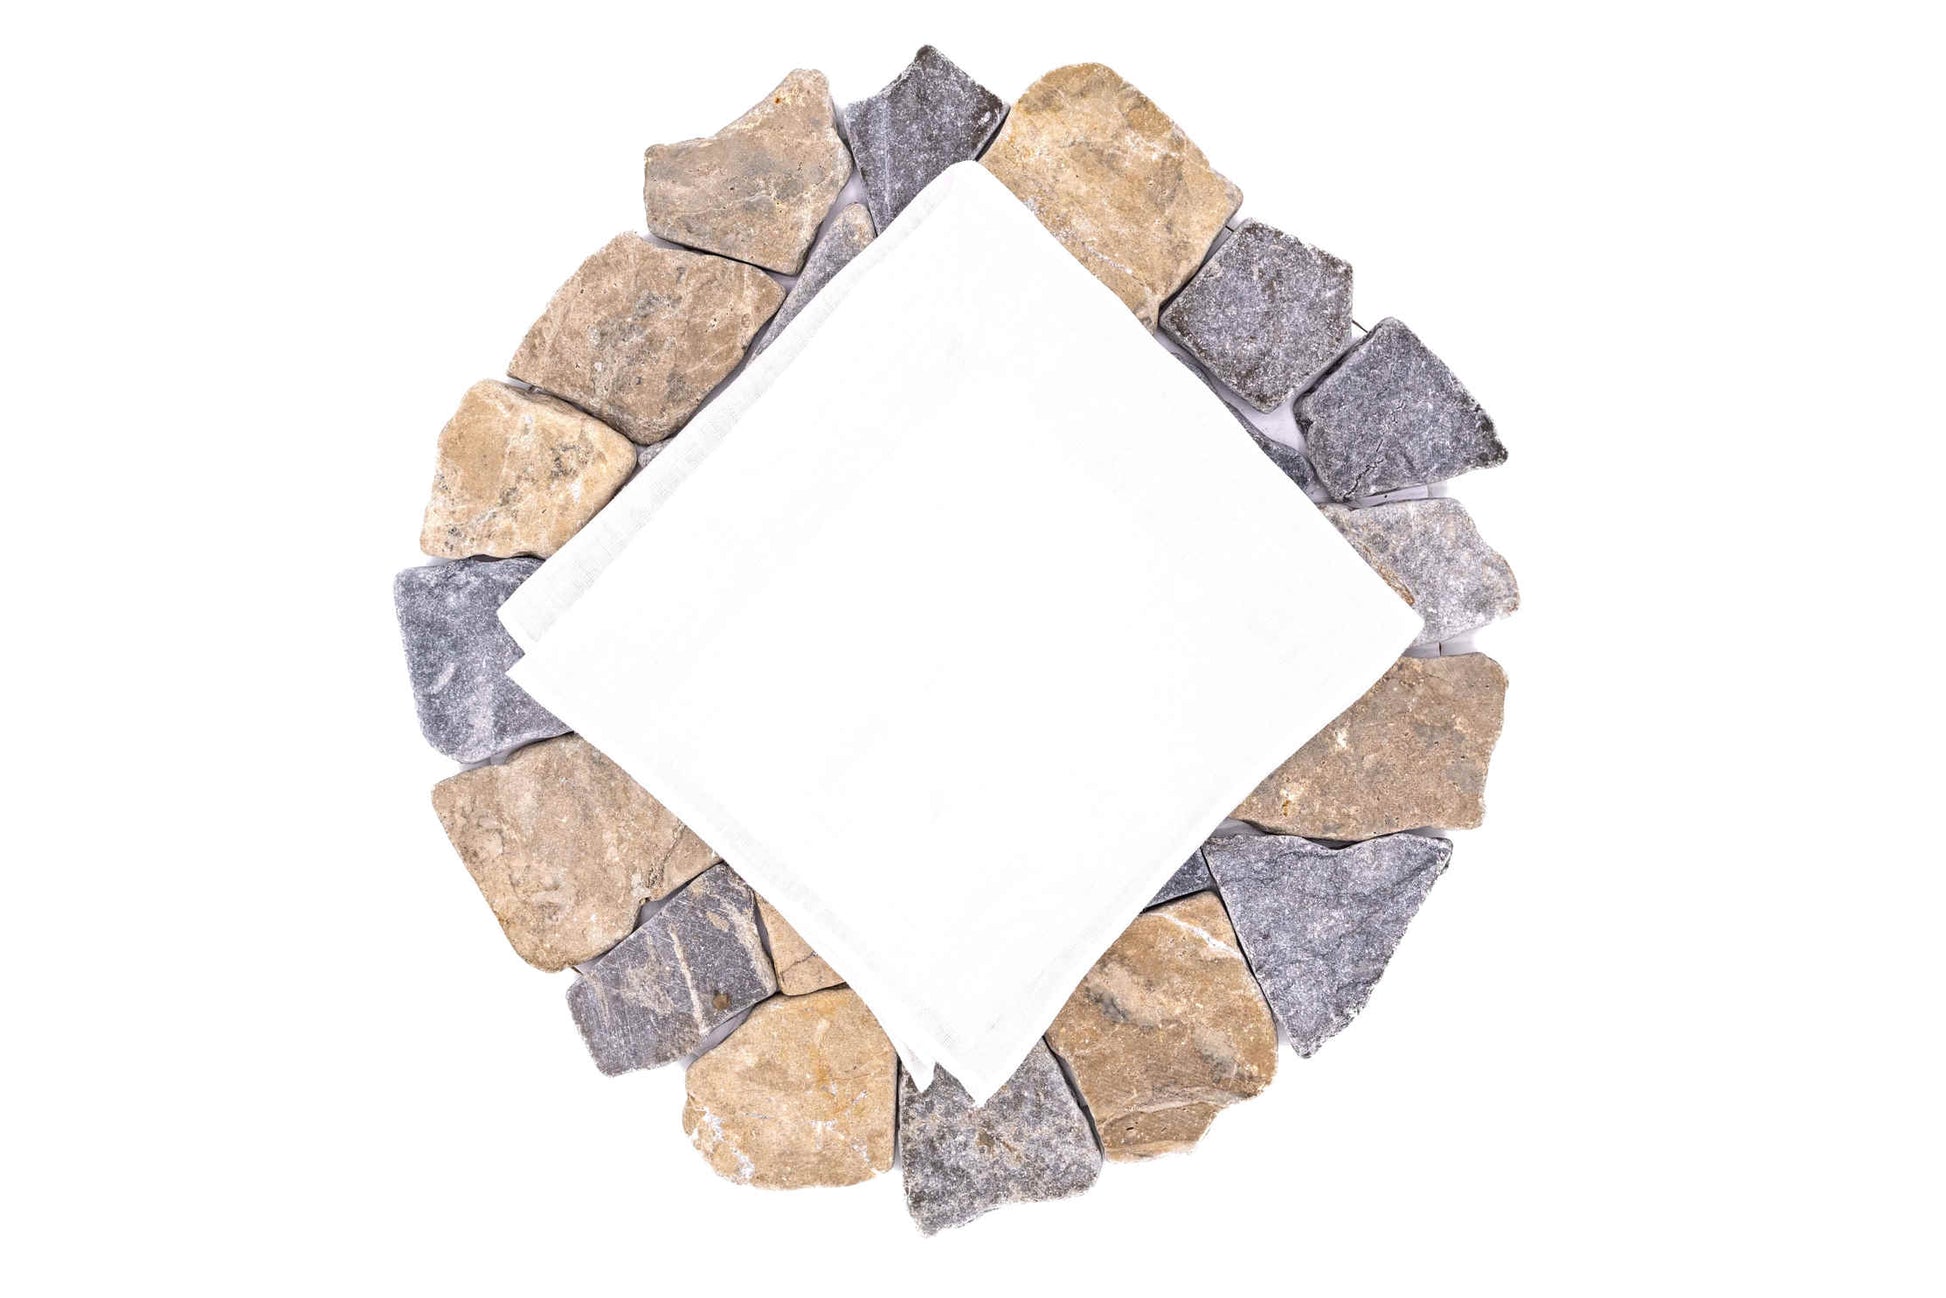 White linen handkerchief folded on a circle of stones.